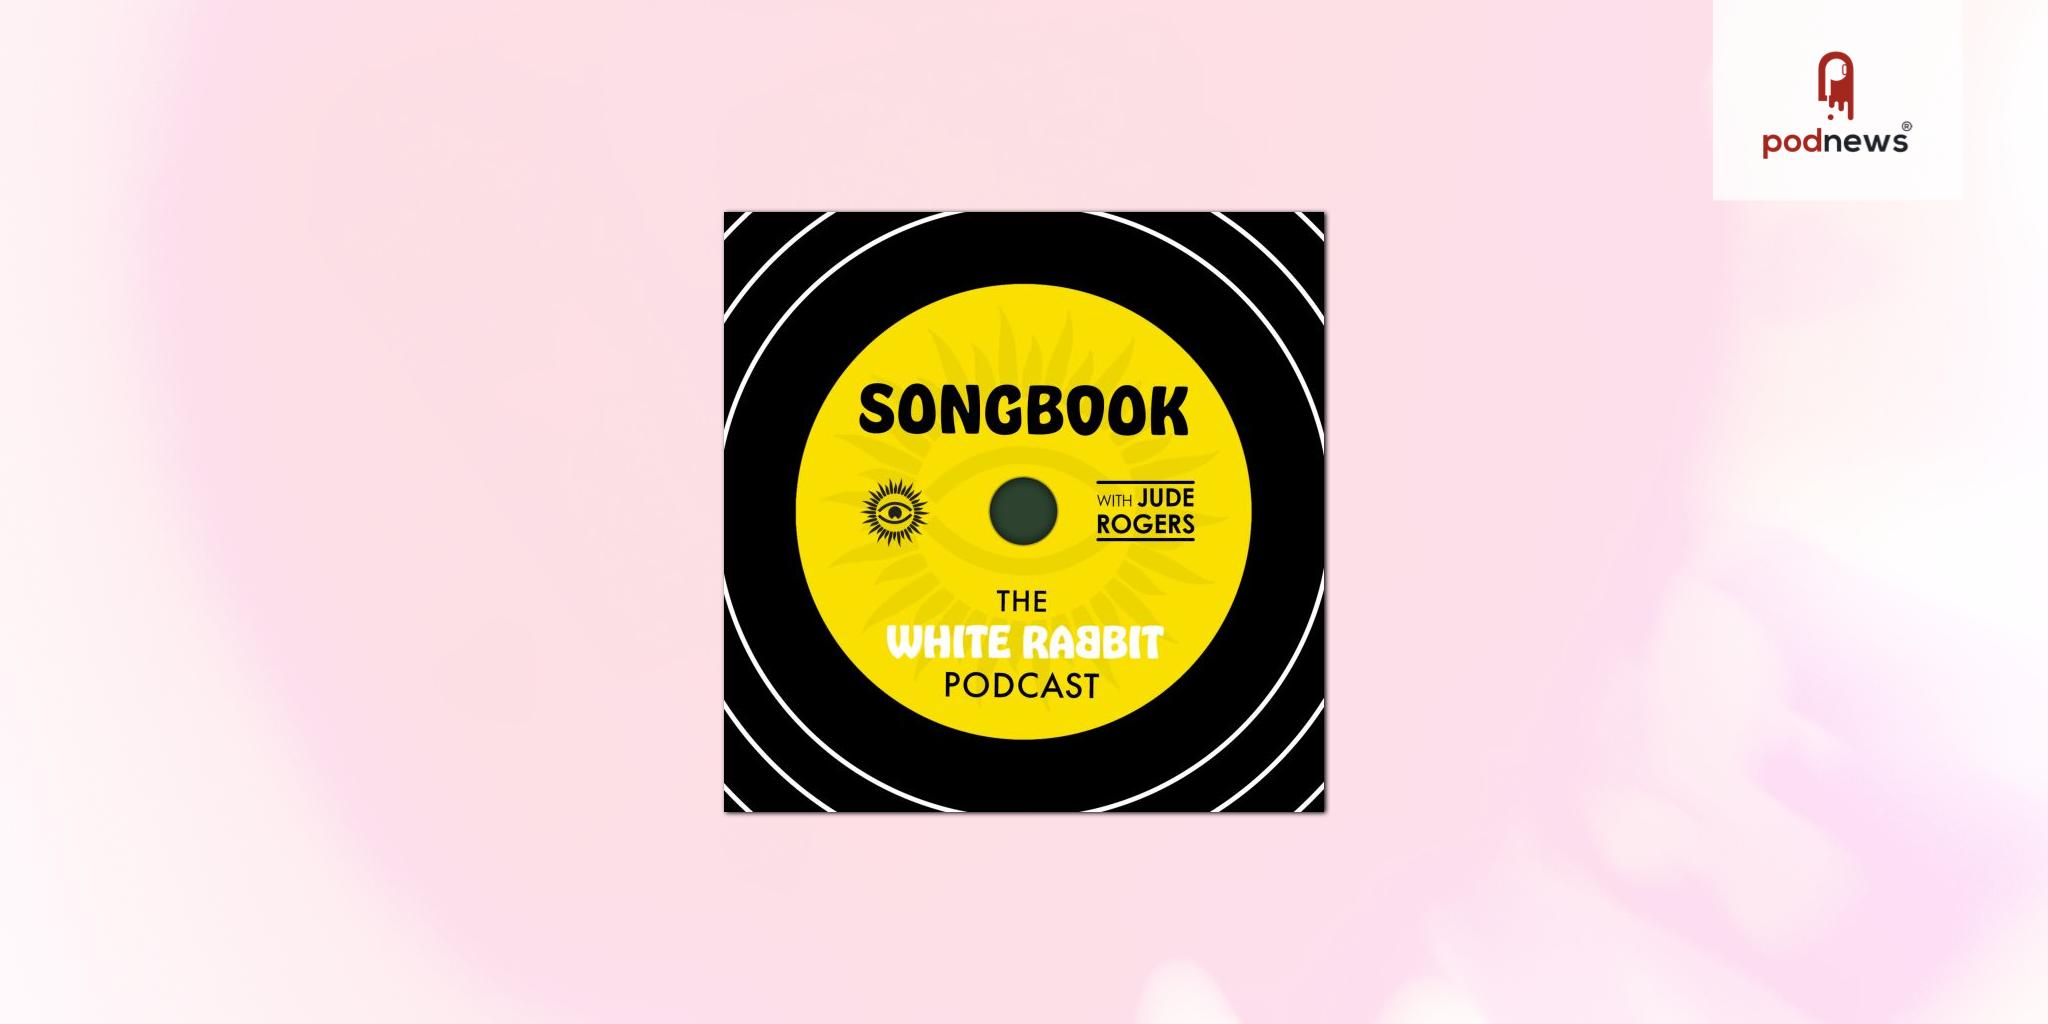 White Rabbit launches a new podcast, Songbook, presented and written by Jude Rogers